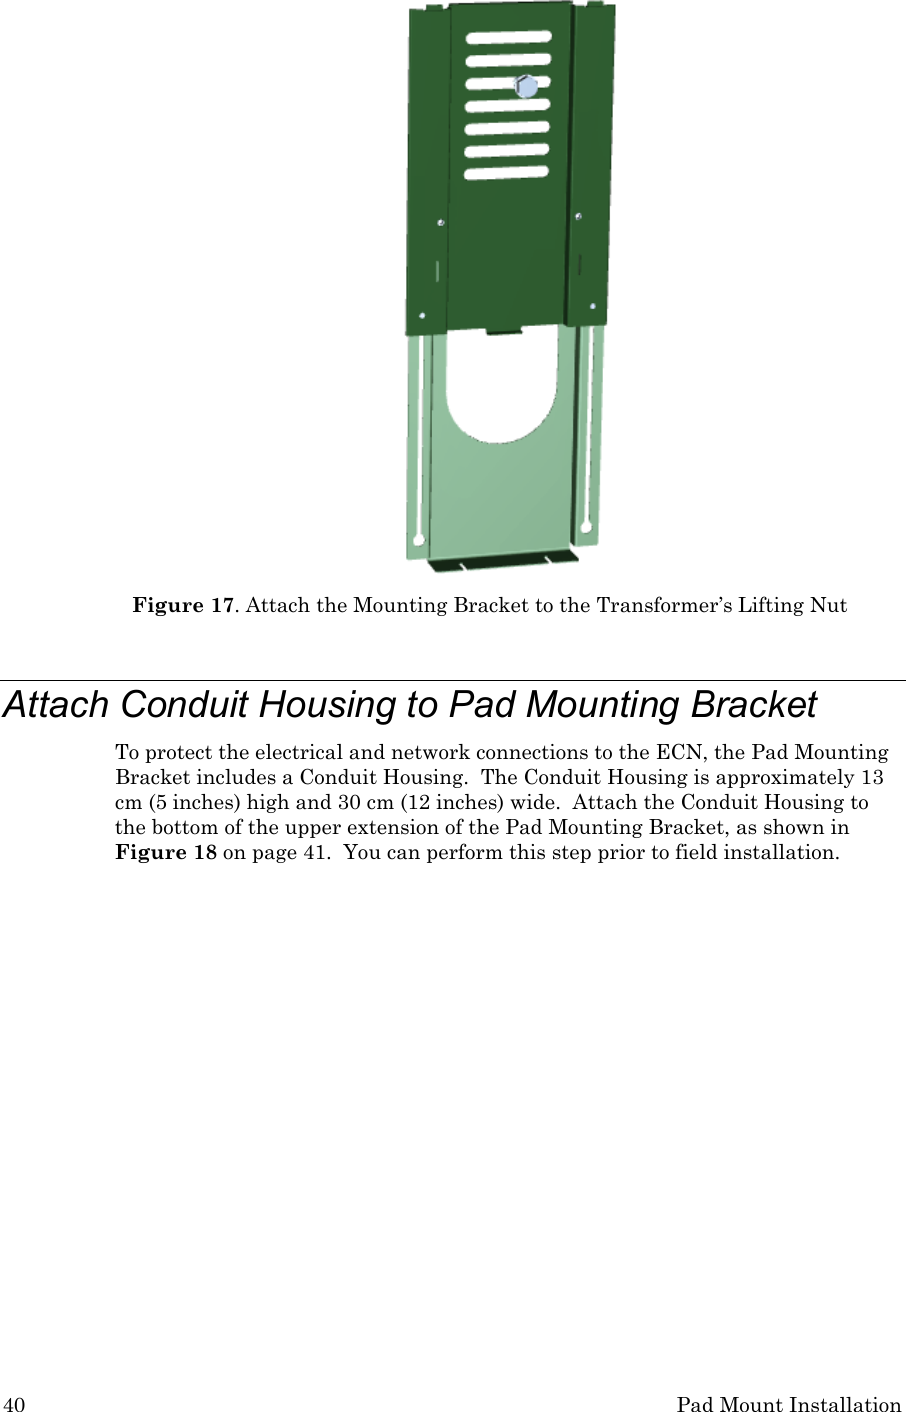 40 Pad Mount Installation  Figure 17. Attach the Mounting Bracket to the Transformer’s Lifting Nut  Attach Conduit Housing to Pad Mounting Bracket To protect the electrical and network connections to the ECN, the Pad Mounting Bracket includes a Conduit Housing.  The Conduit Housing is approximately 13 cm (5 inches) high and 30 cm (12 inches) wide.  Attach the Conduit Housing to the bottom of the upper extension of the Pad Mounting Bracket, as shown in Figure 18 on page 41.  You can perform this step prior to field installation. 